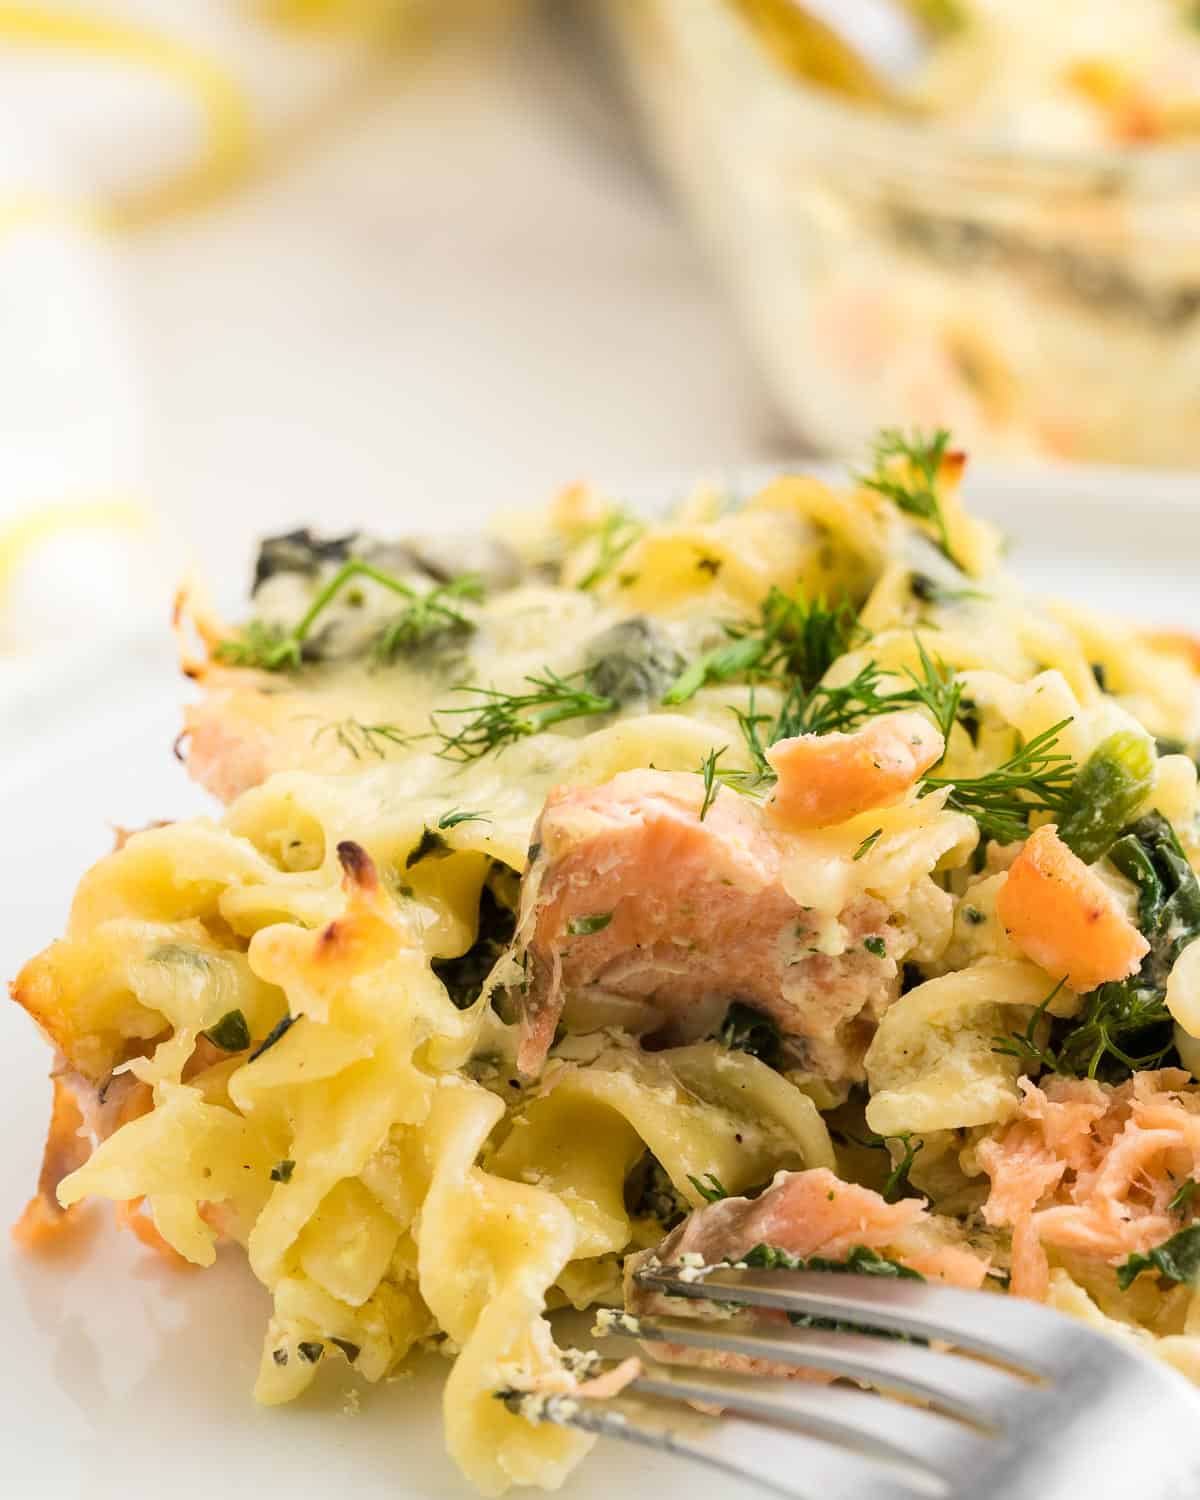 freshly baked salmon casserole on a white plate